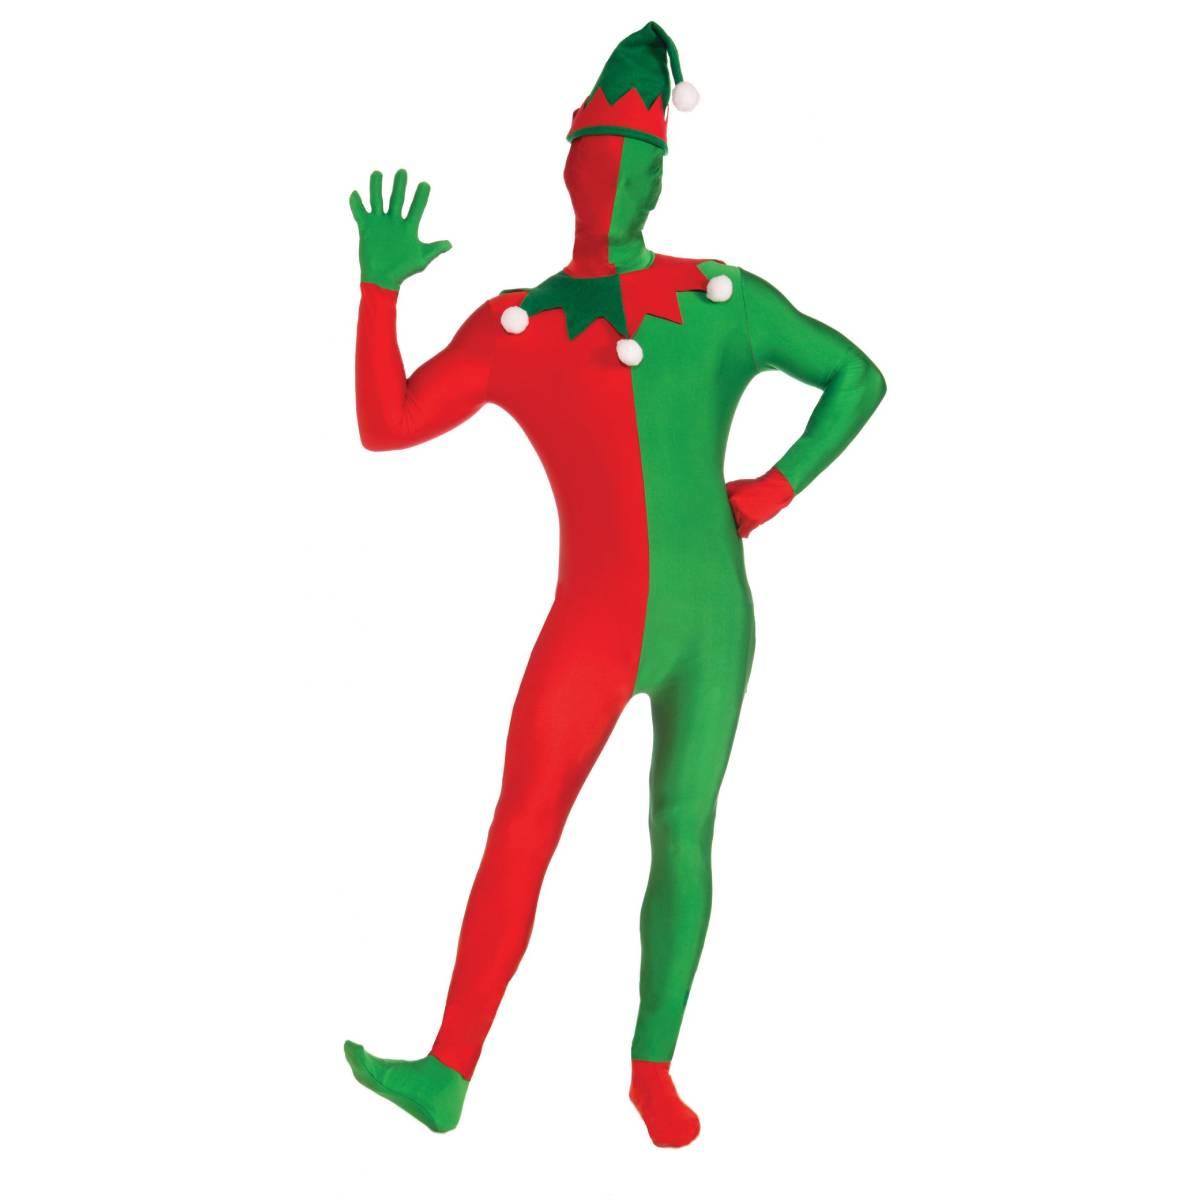 Disappearing Elf bodysuit costume by Bristol Novelties AC785 available here at Karnival Costumes online Christmas party shop.